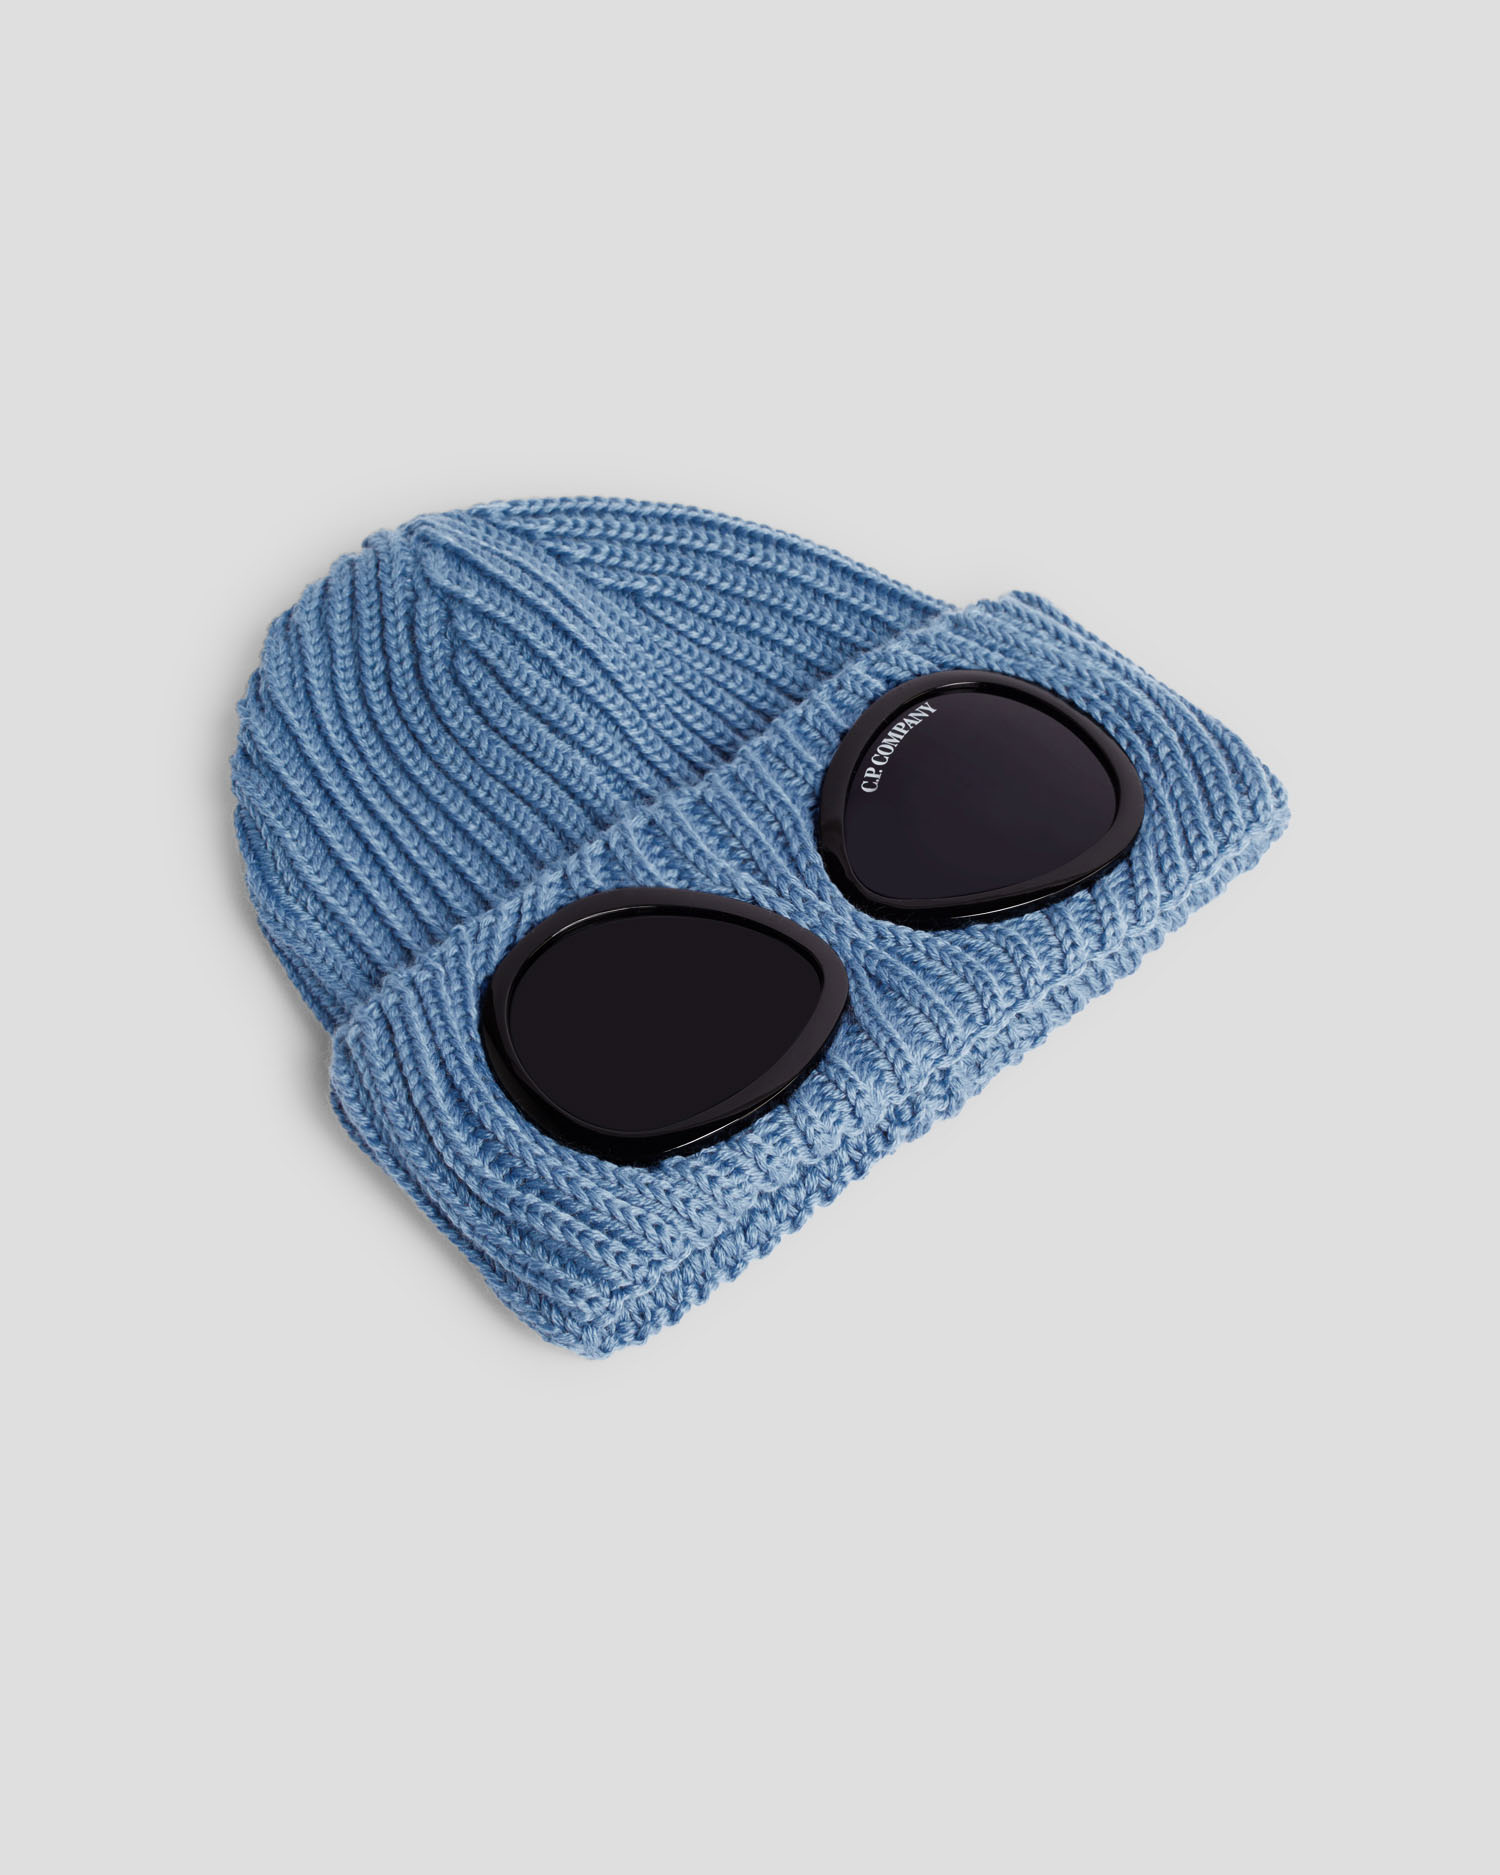 Kids Off-White Goggle Beanie by C.P. Company Kids on Sale